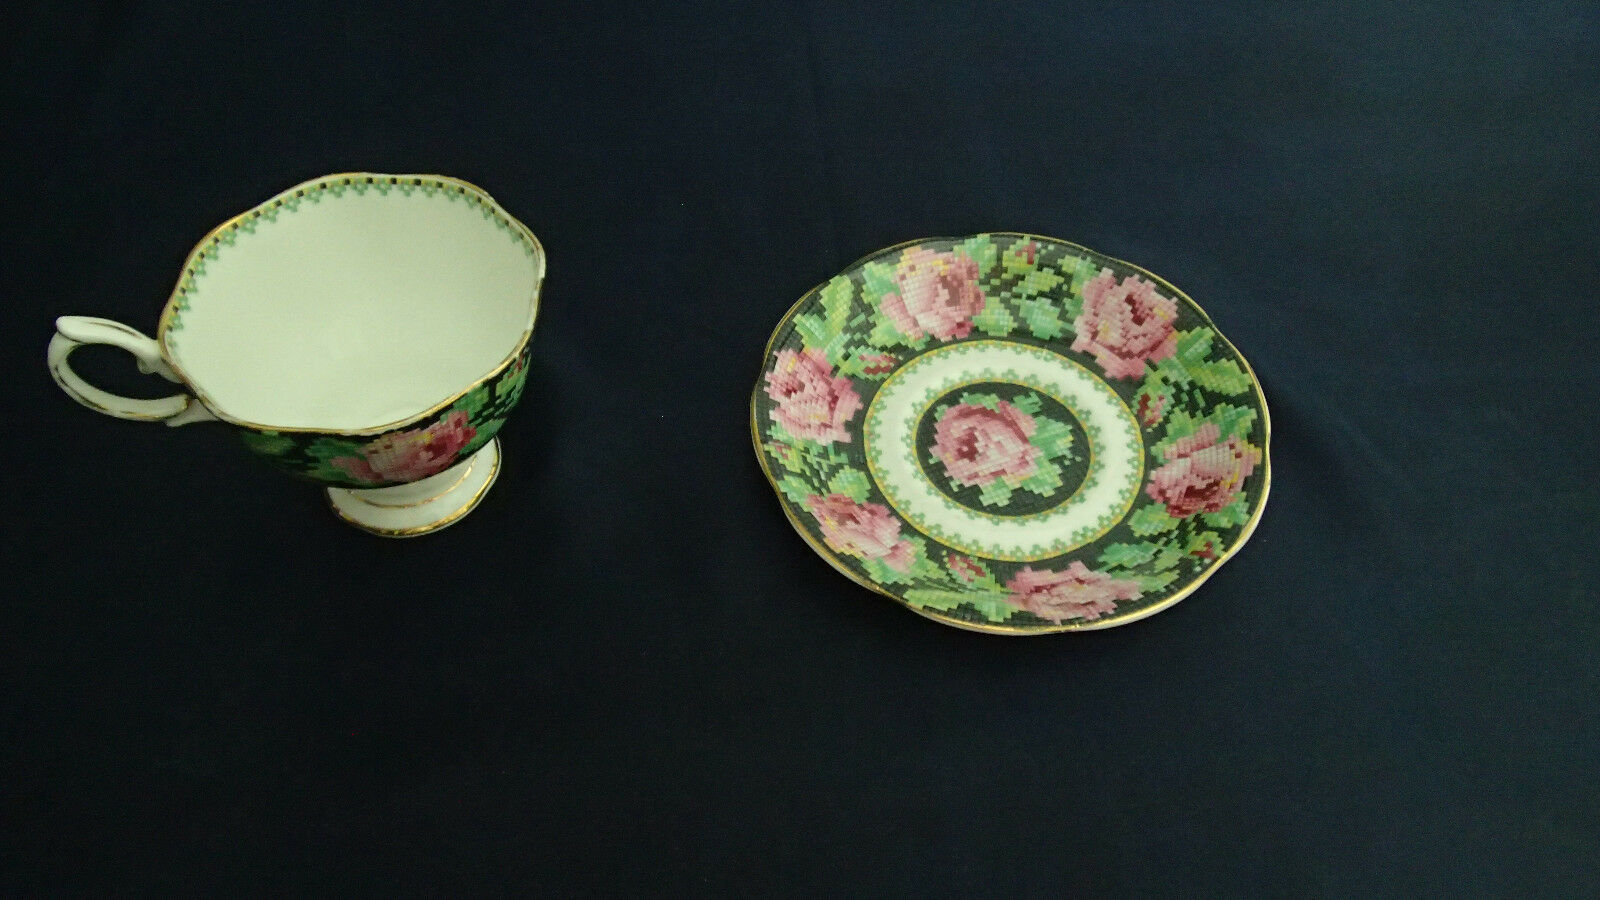 Primary image for Vintage Needle Point Royal Albert Tea Cup and Saucer, Excellent Condition